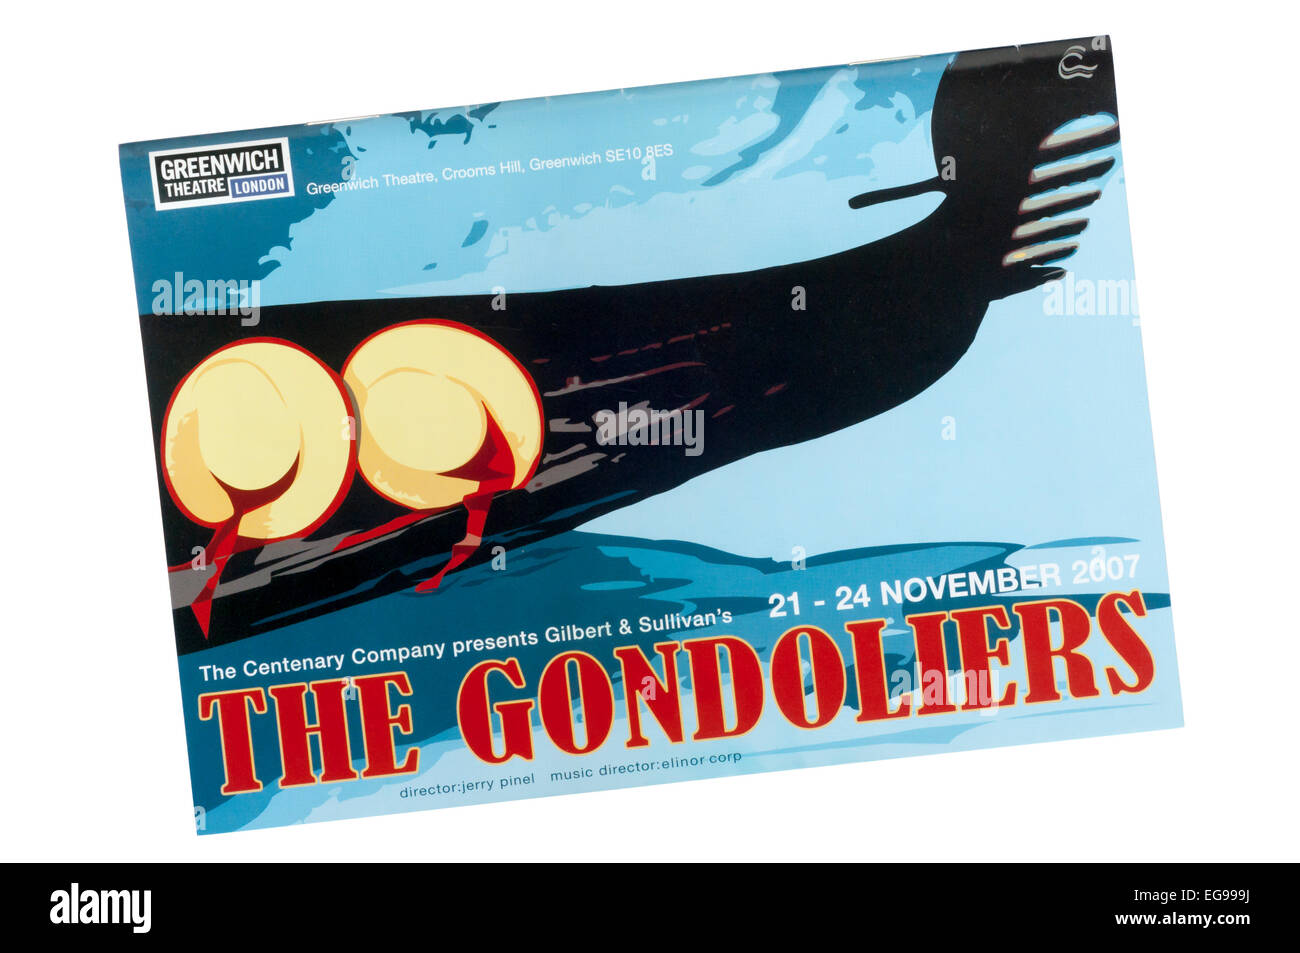 Programme for the 2007 production of The Gondoliers by Gilbert & Sullivan at Greenwich Theatre. Stock Photo